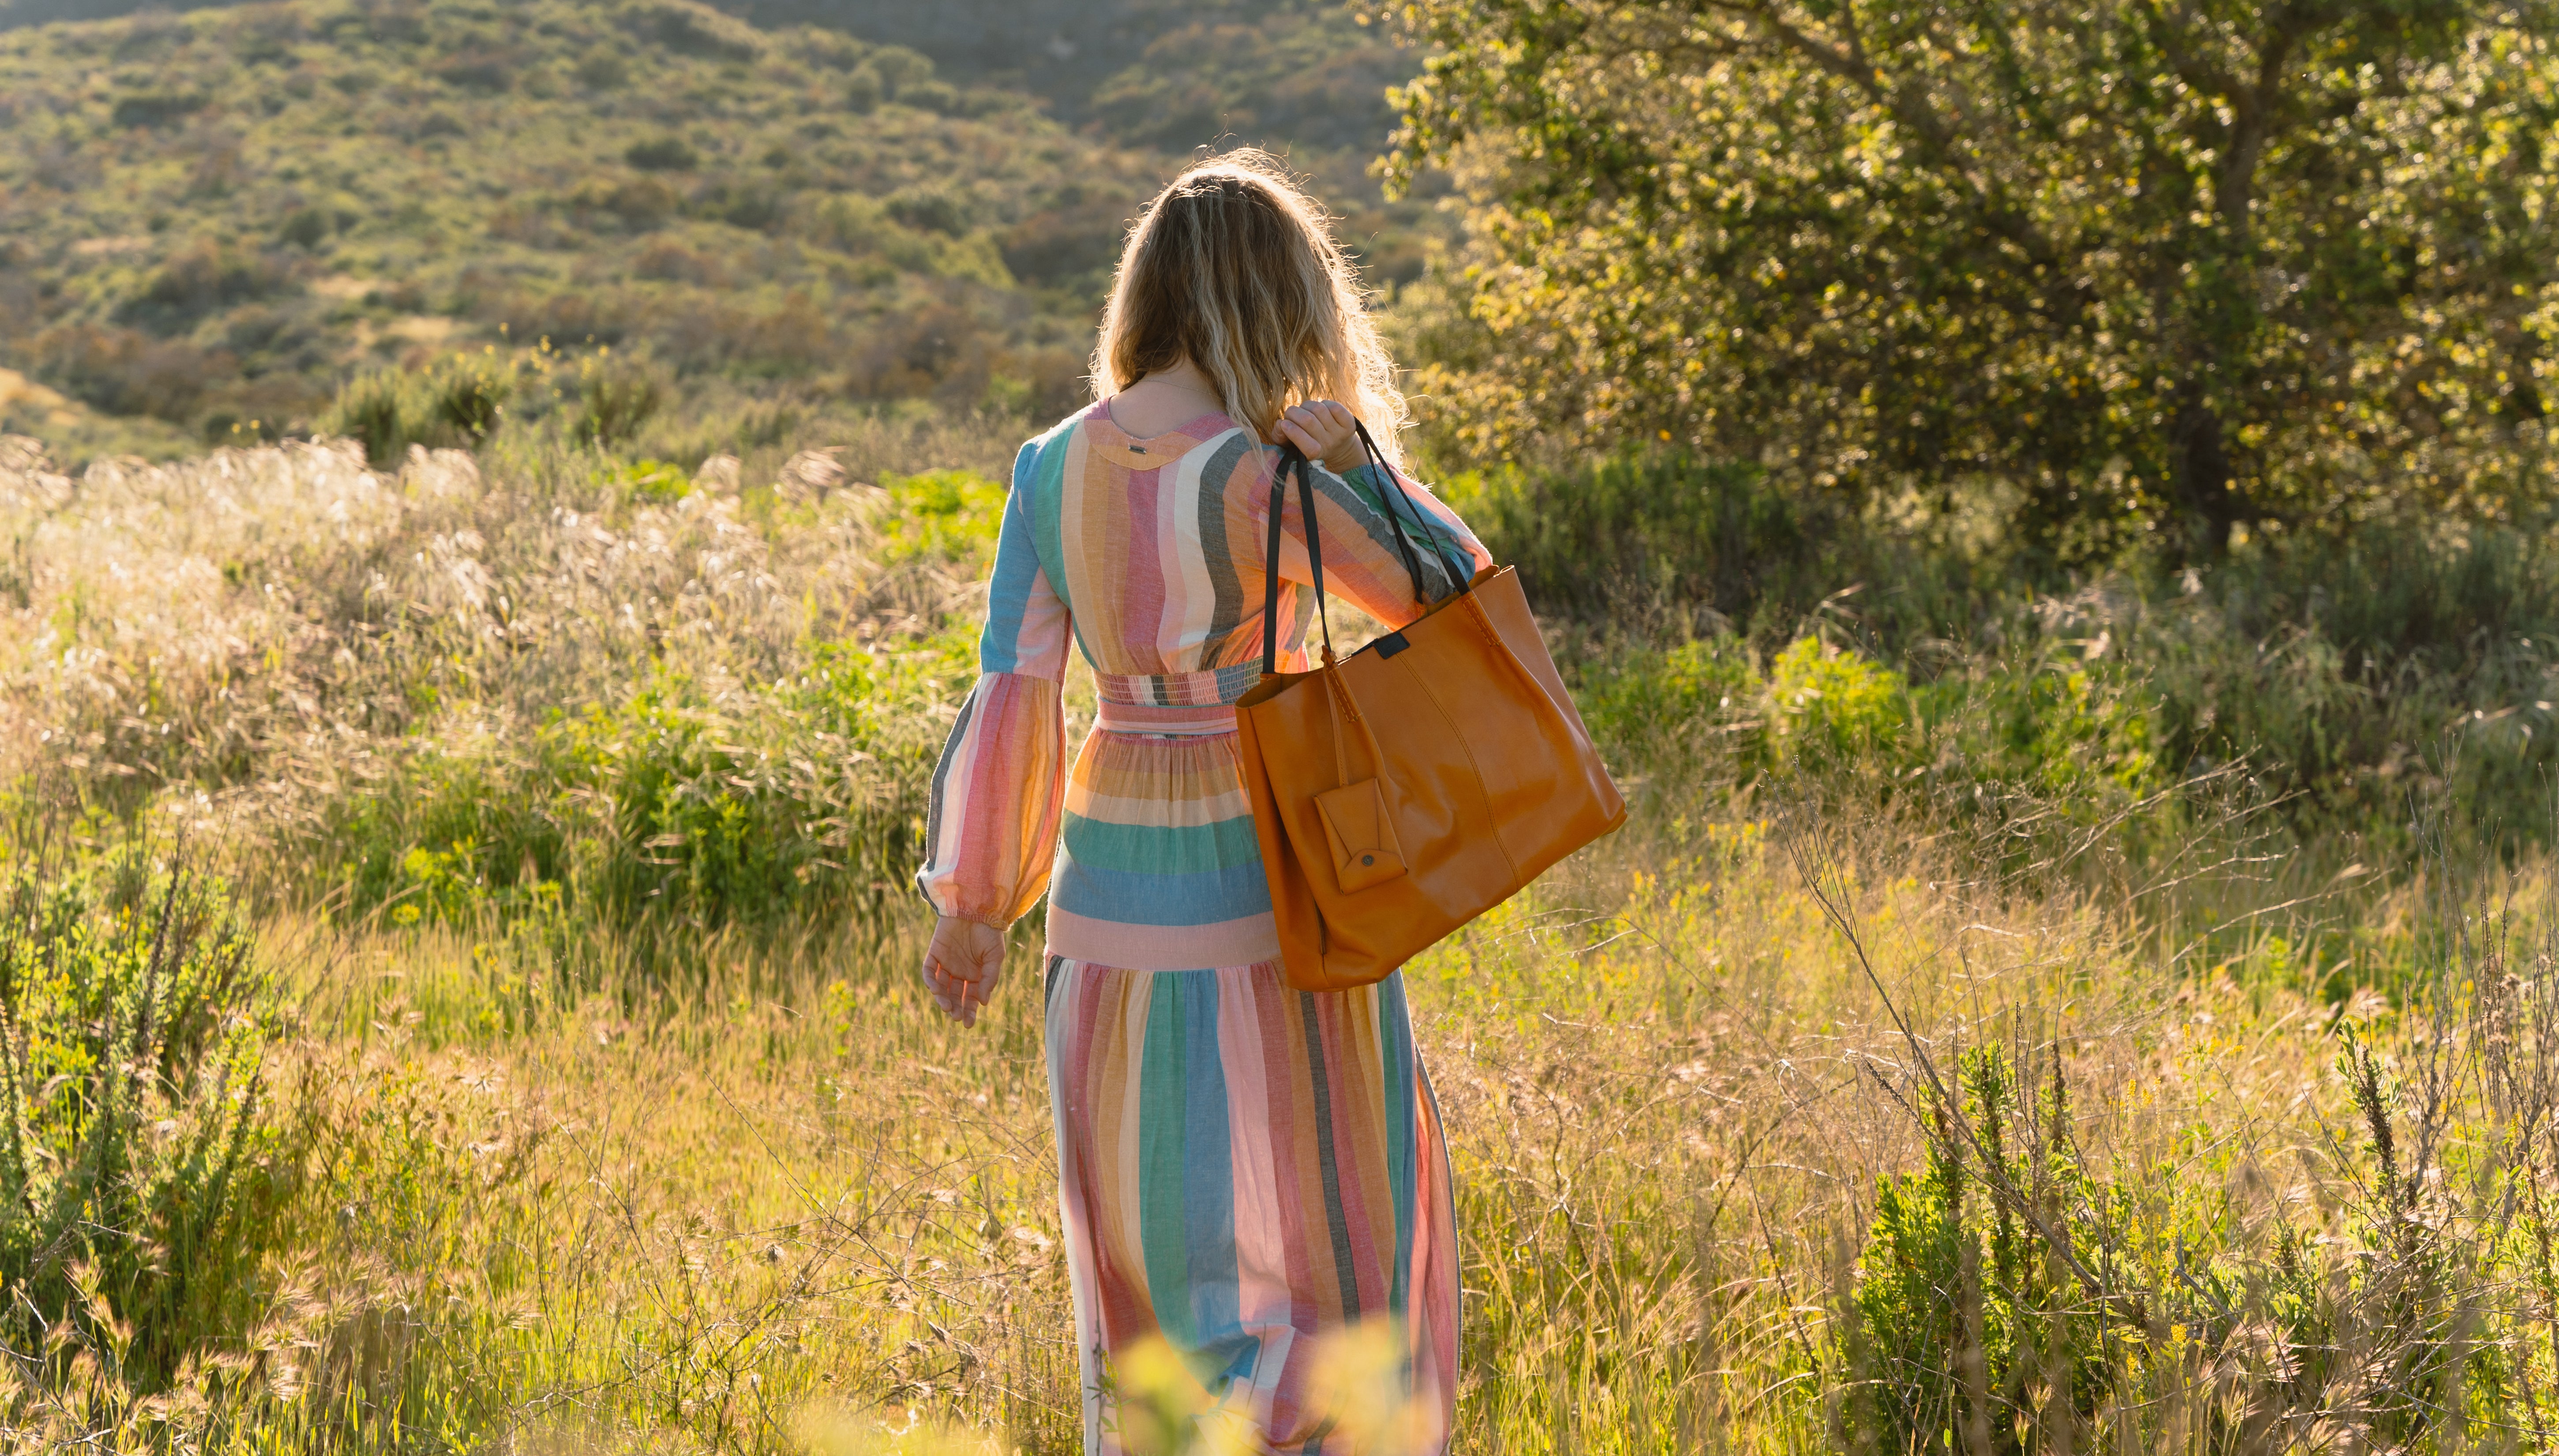 Sparrow Handmade - Artisanal Bags and Accessories